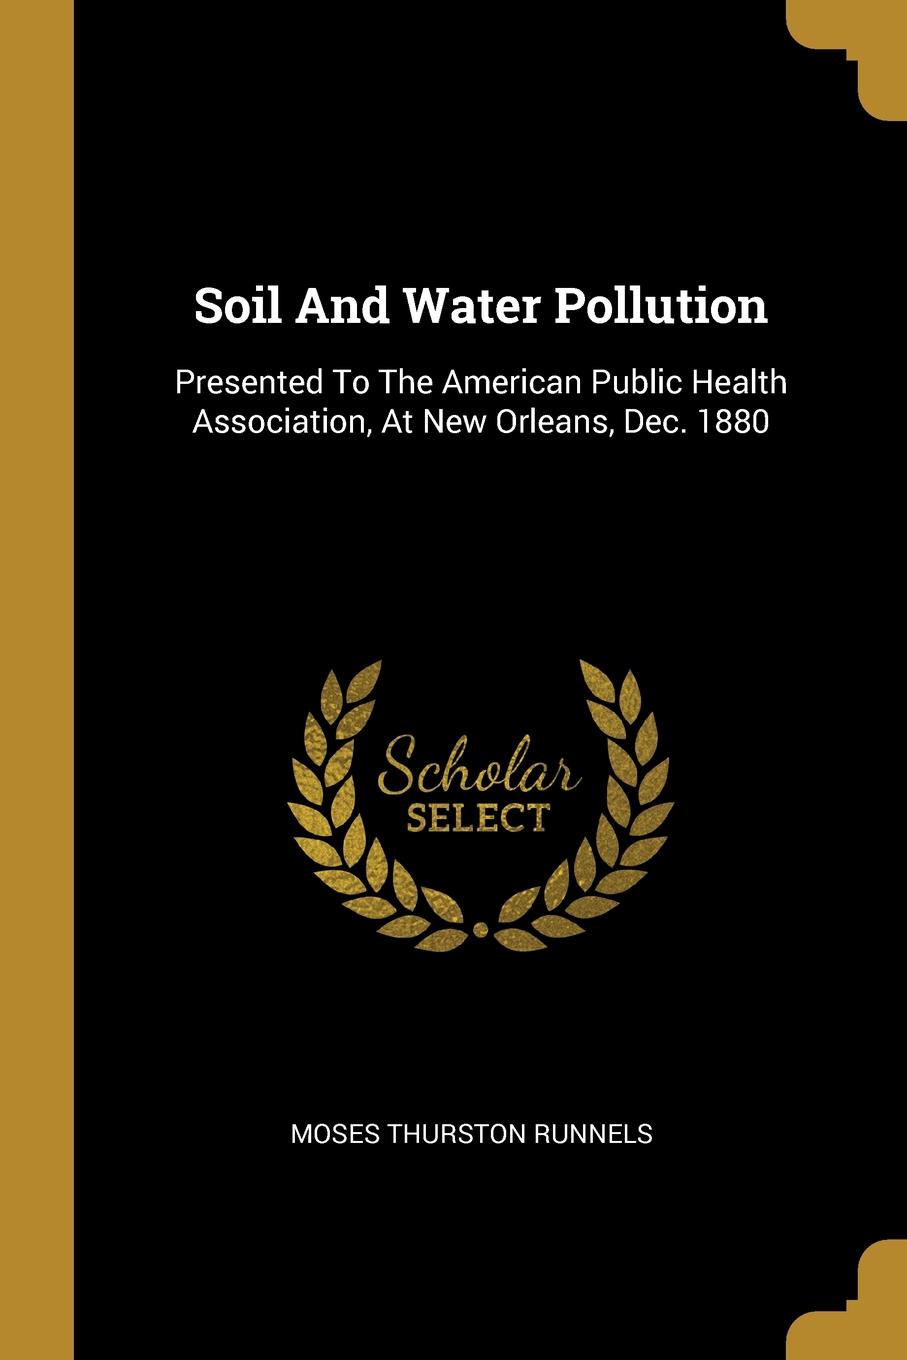 Soil And Water Pollution. Presented To The American Public Health Association, At New Orleans, Dec. 1880